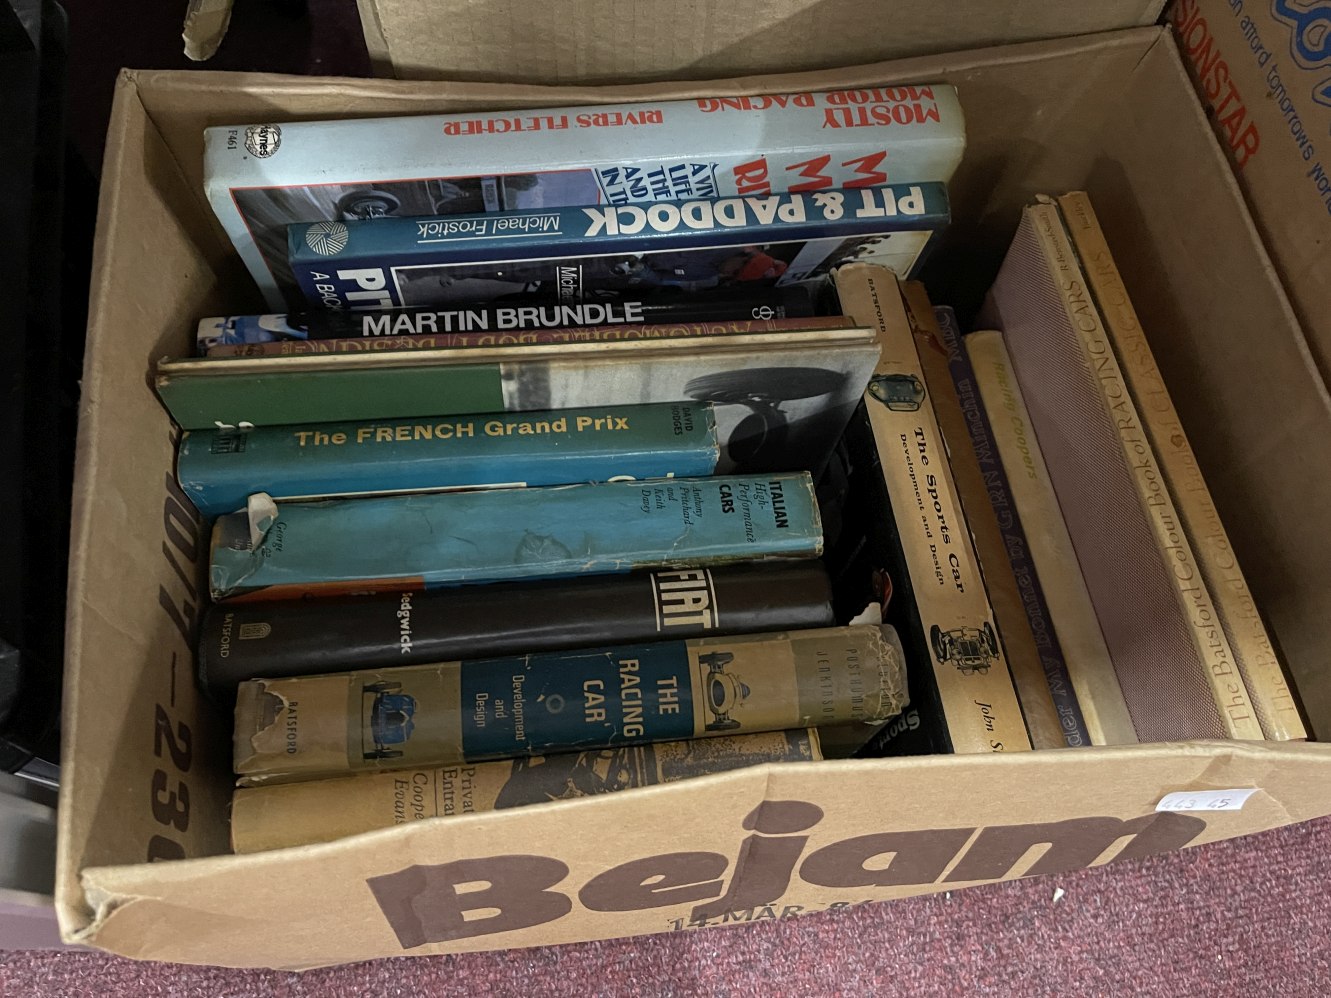 Motoring Books: Three large boxes of related books, some unusual titles. - Image 2 of 2